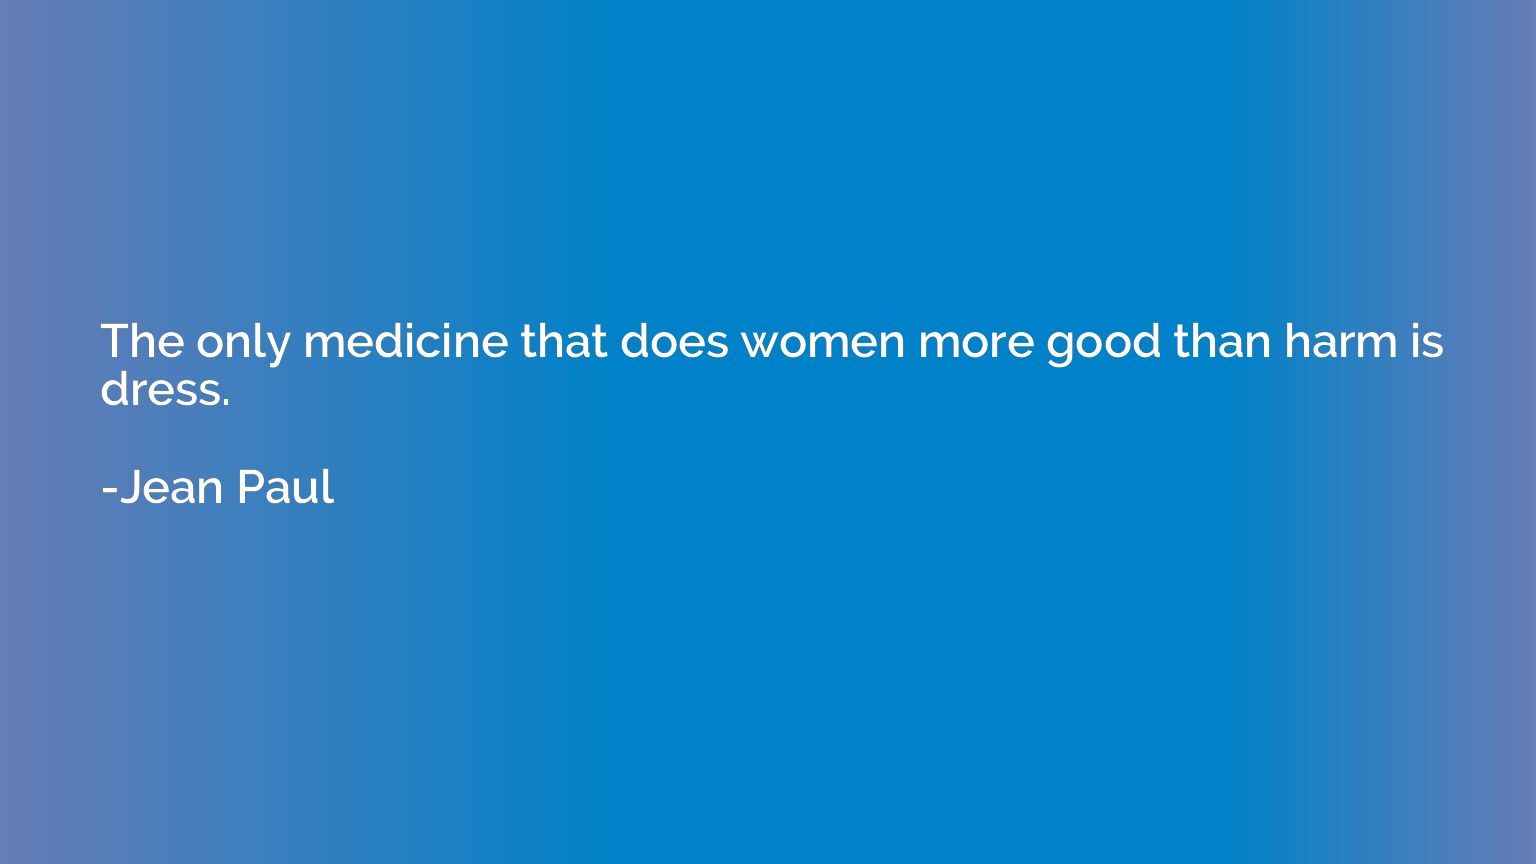 The only medicine that does women more good than harm is dre